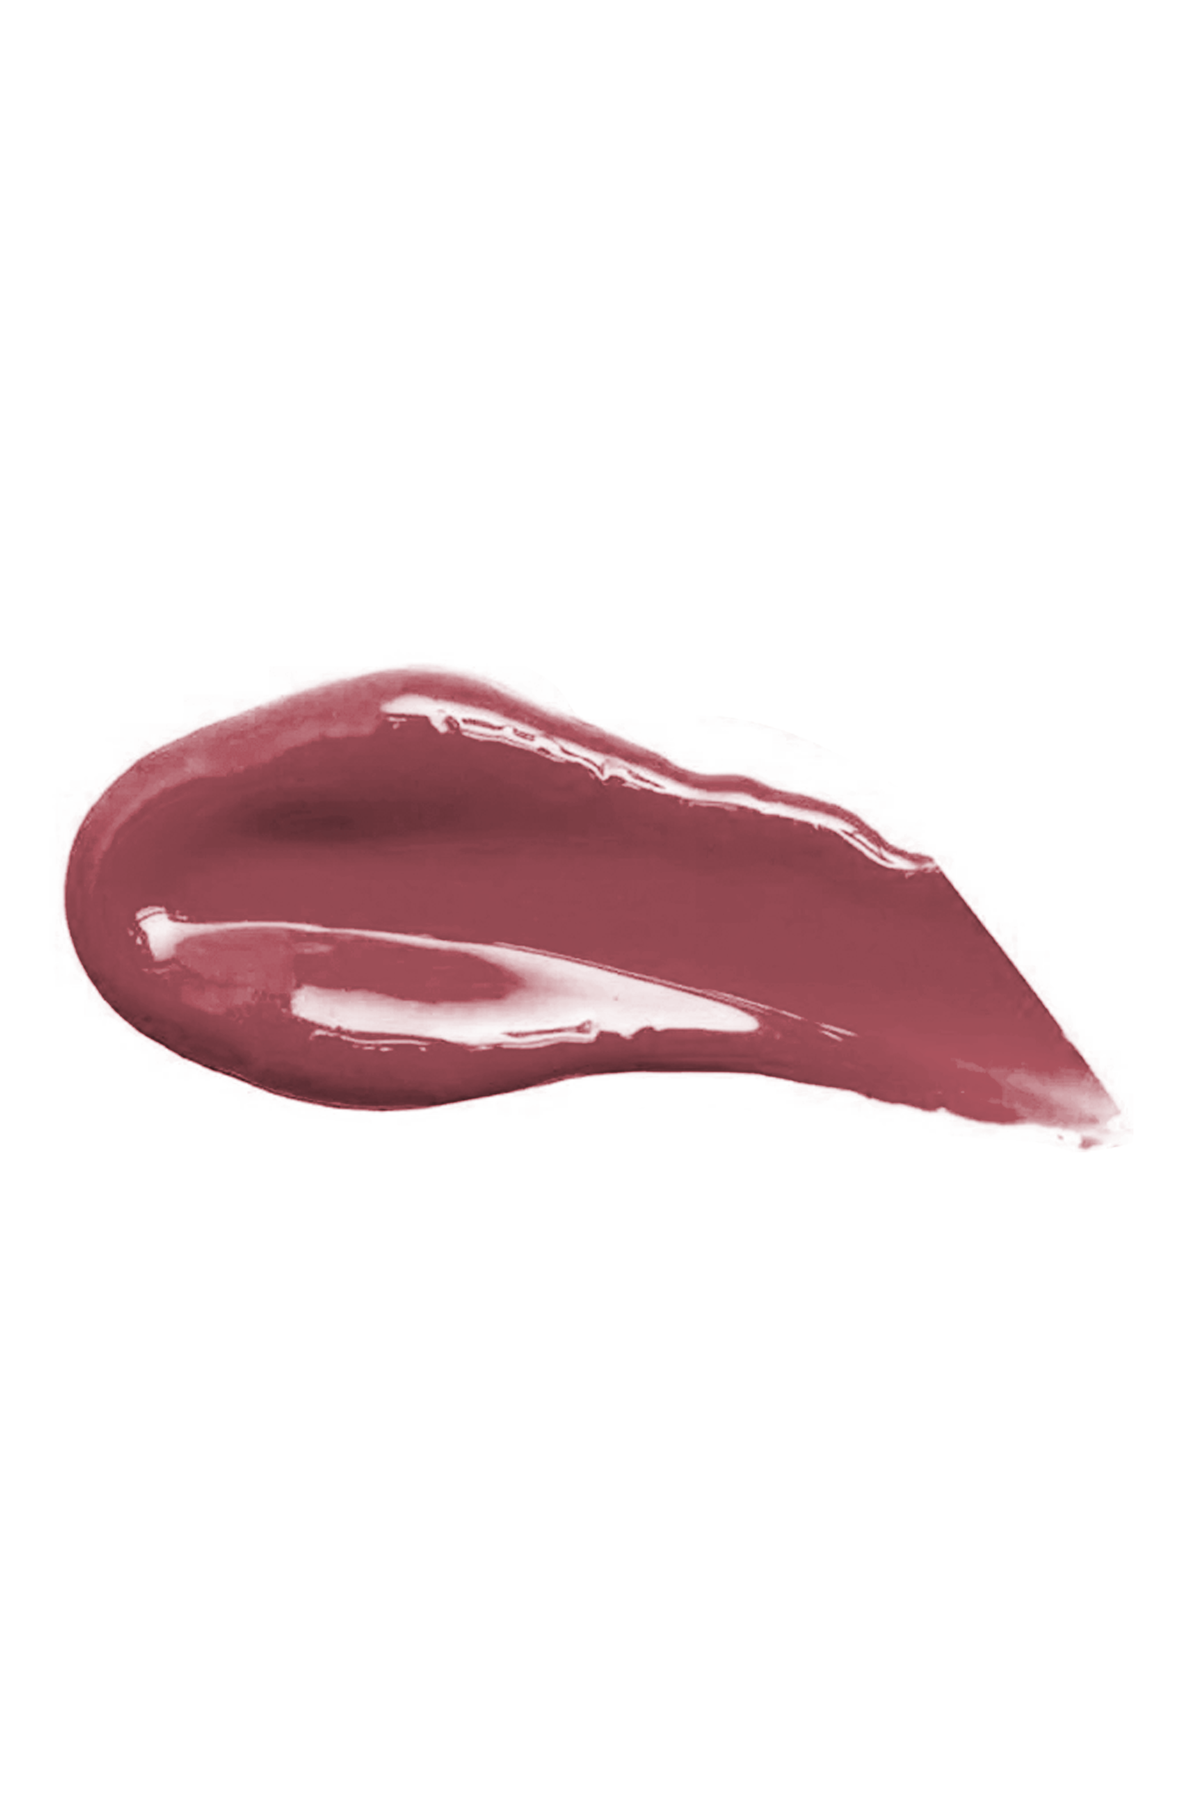 TOPFACE Focus Point Perfect Gleam Lipgloss